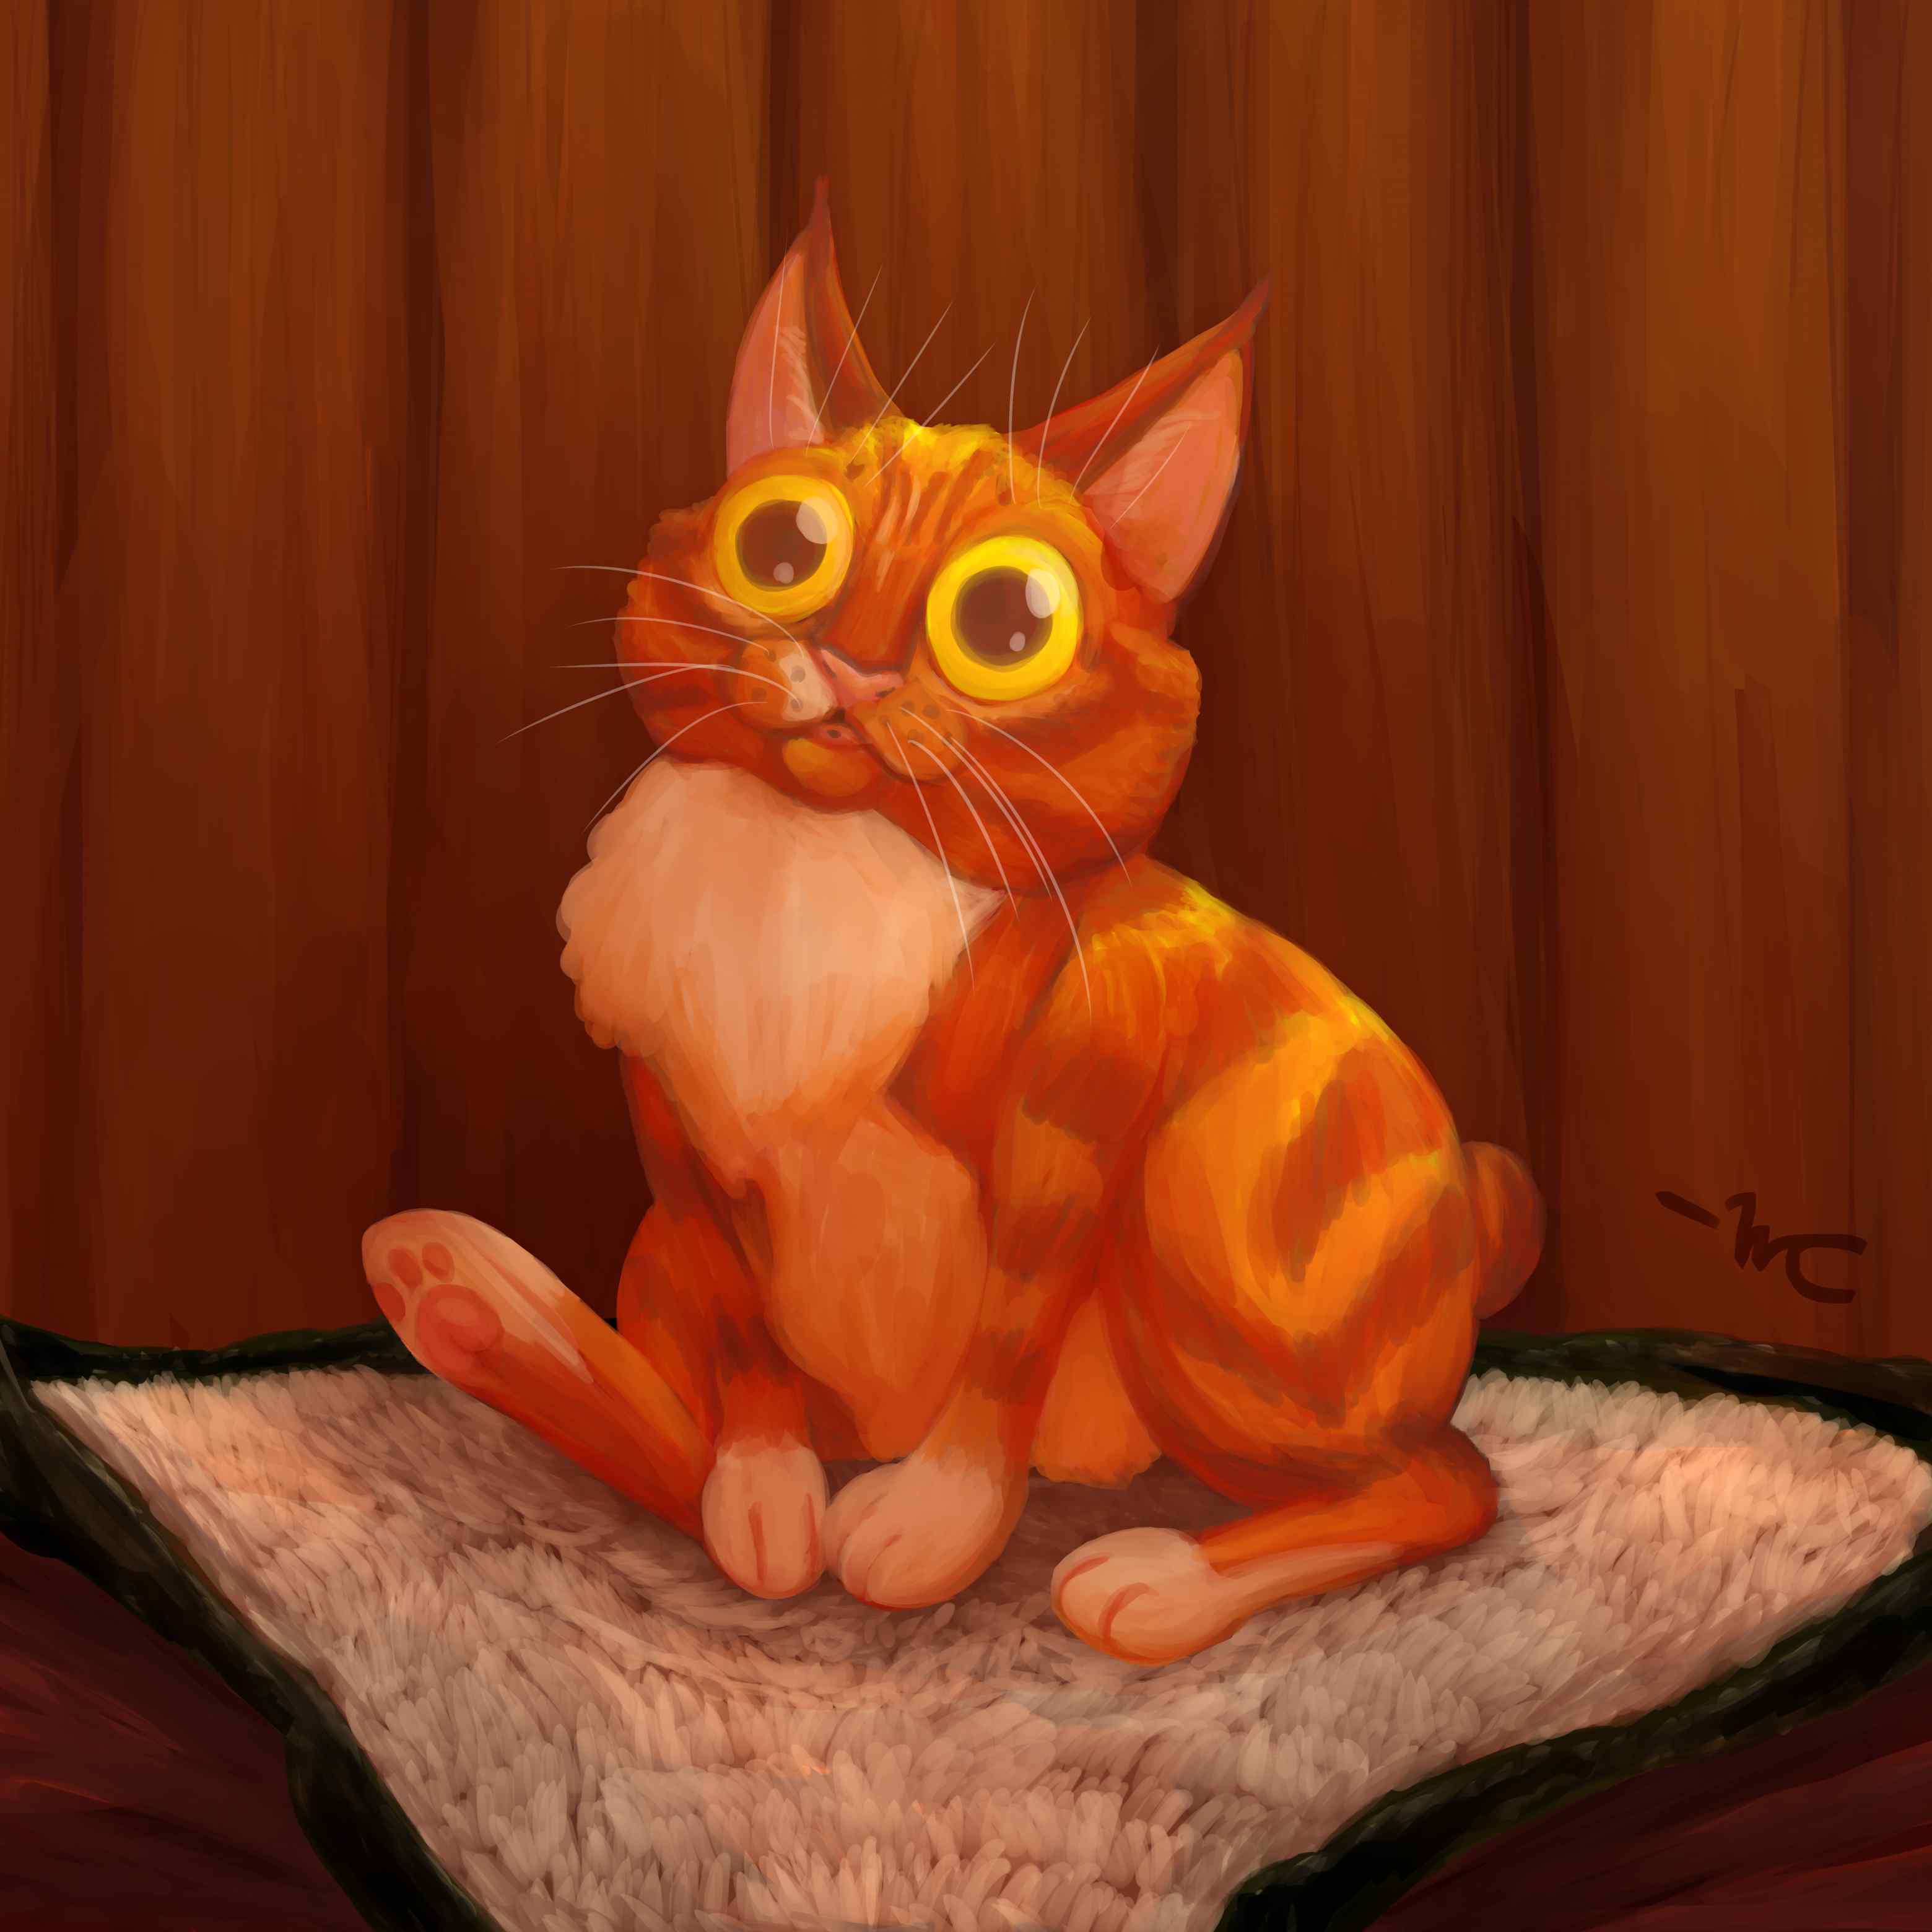 A rough digital painting of an orange bobtail cat sitting on a small fluffy blanket.